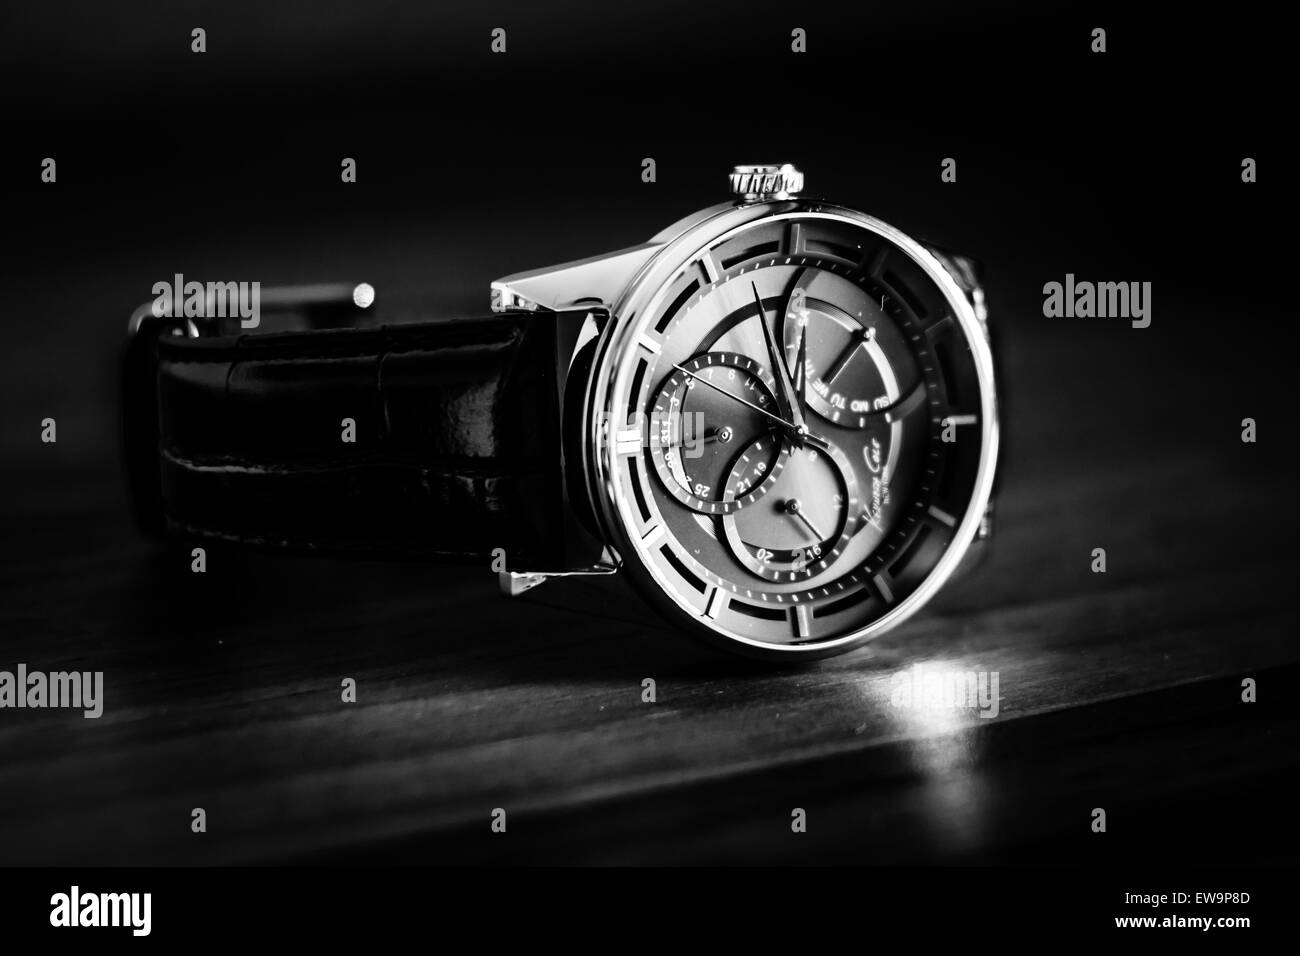 Modern chronometer Kenneth Cole. Black and white. Stock Photo